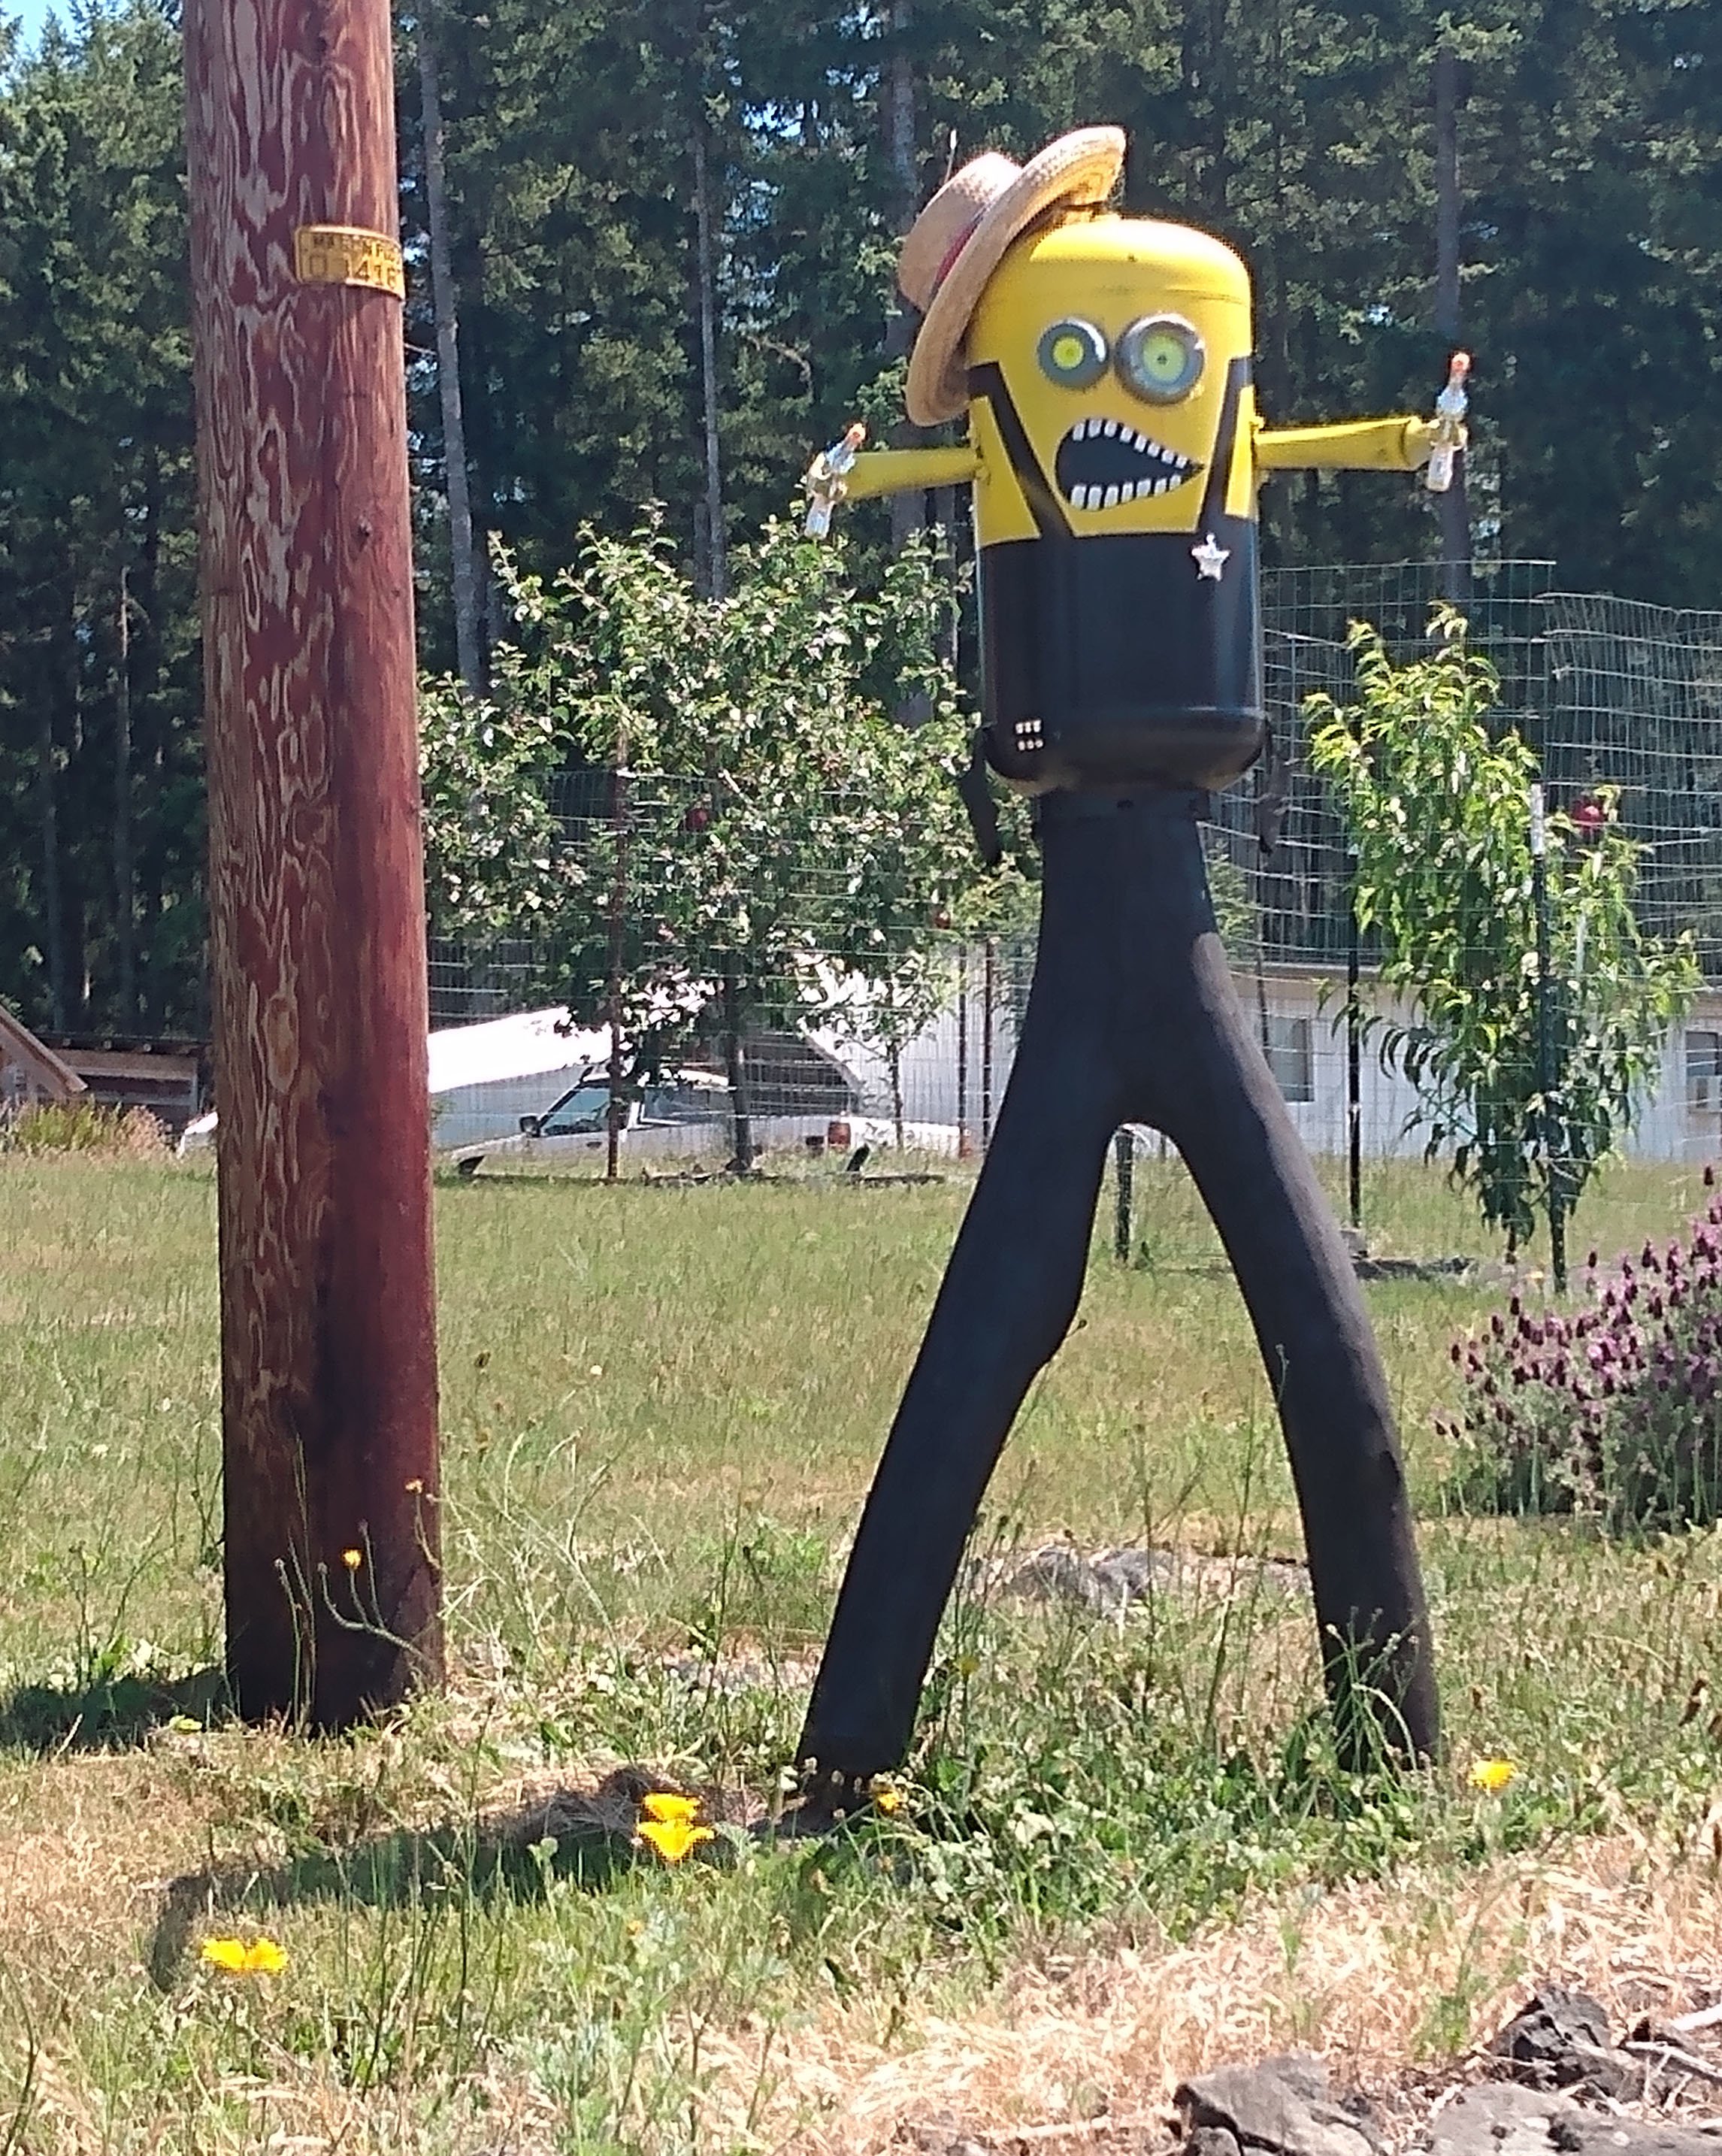  I’ve seen them all over North America. Minions are truly the grand unifier of the western world.  